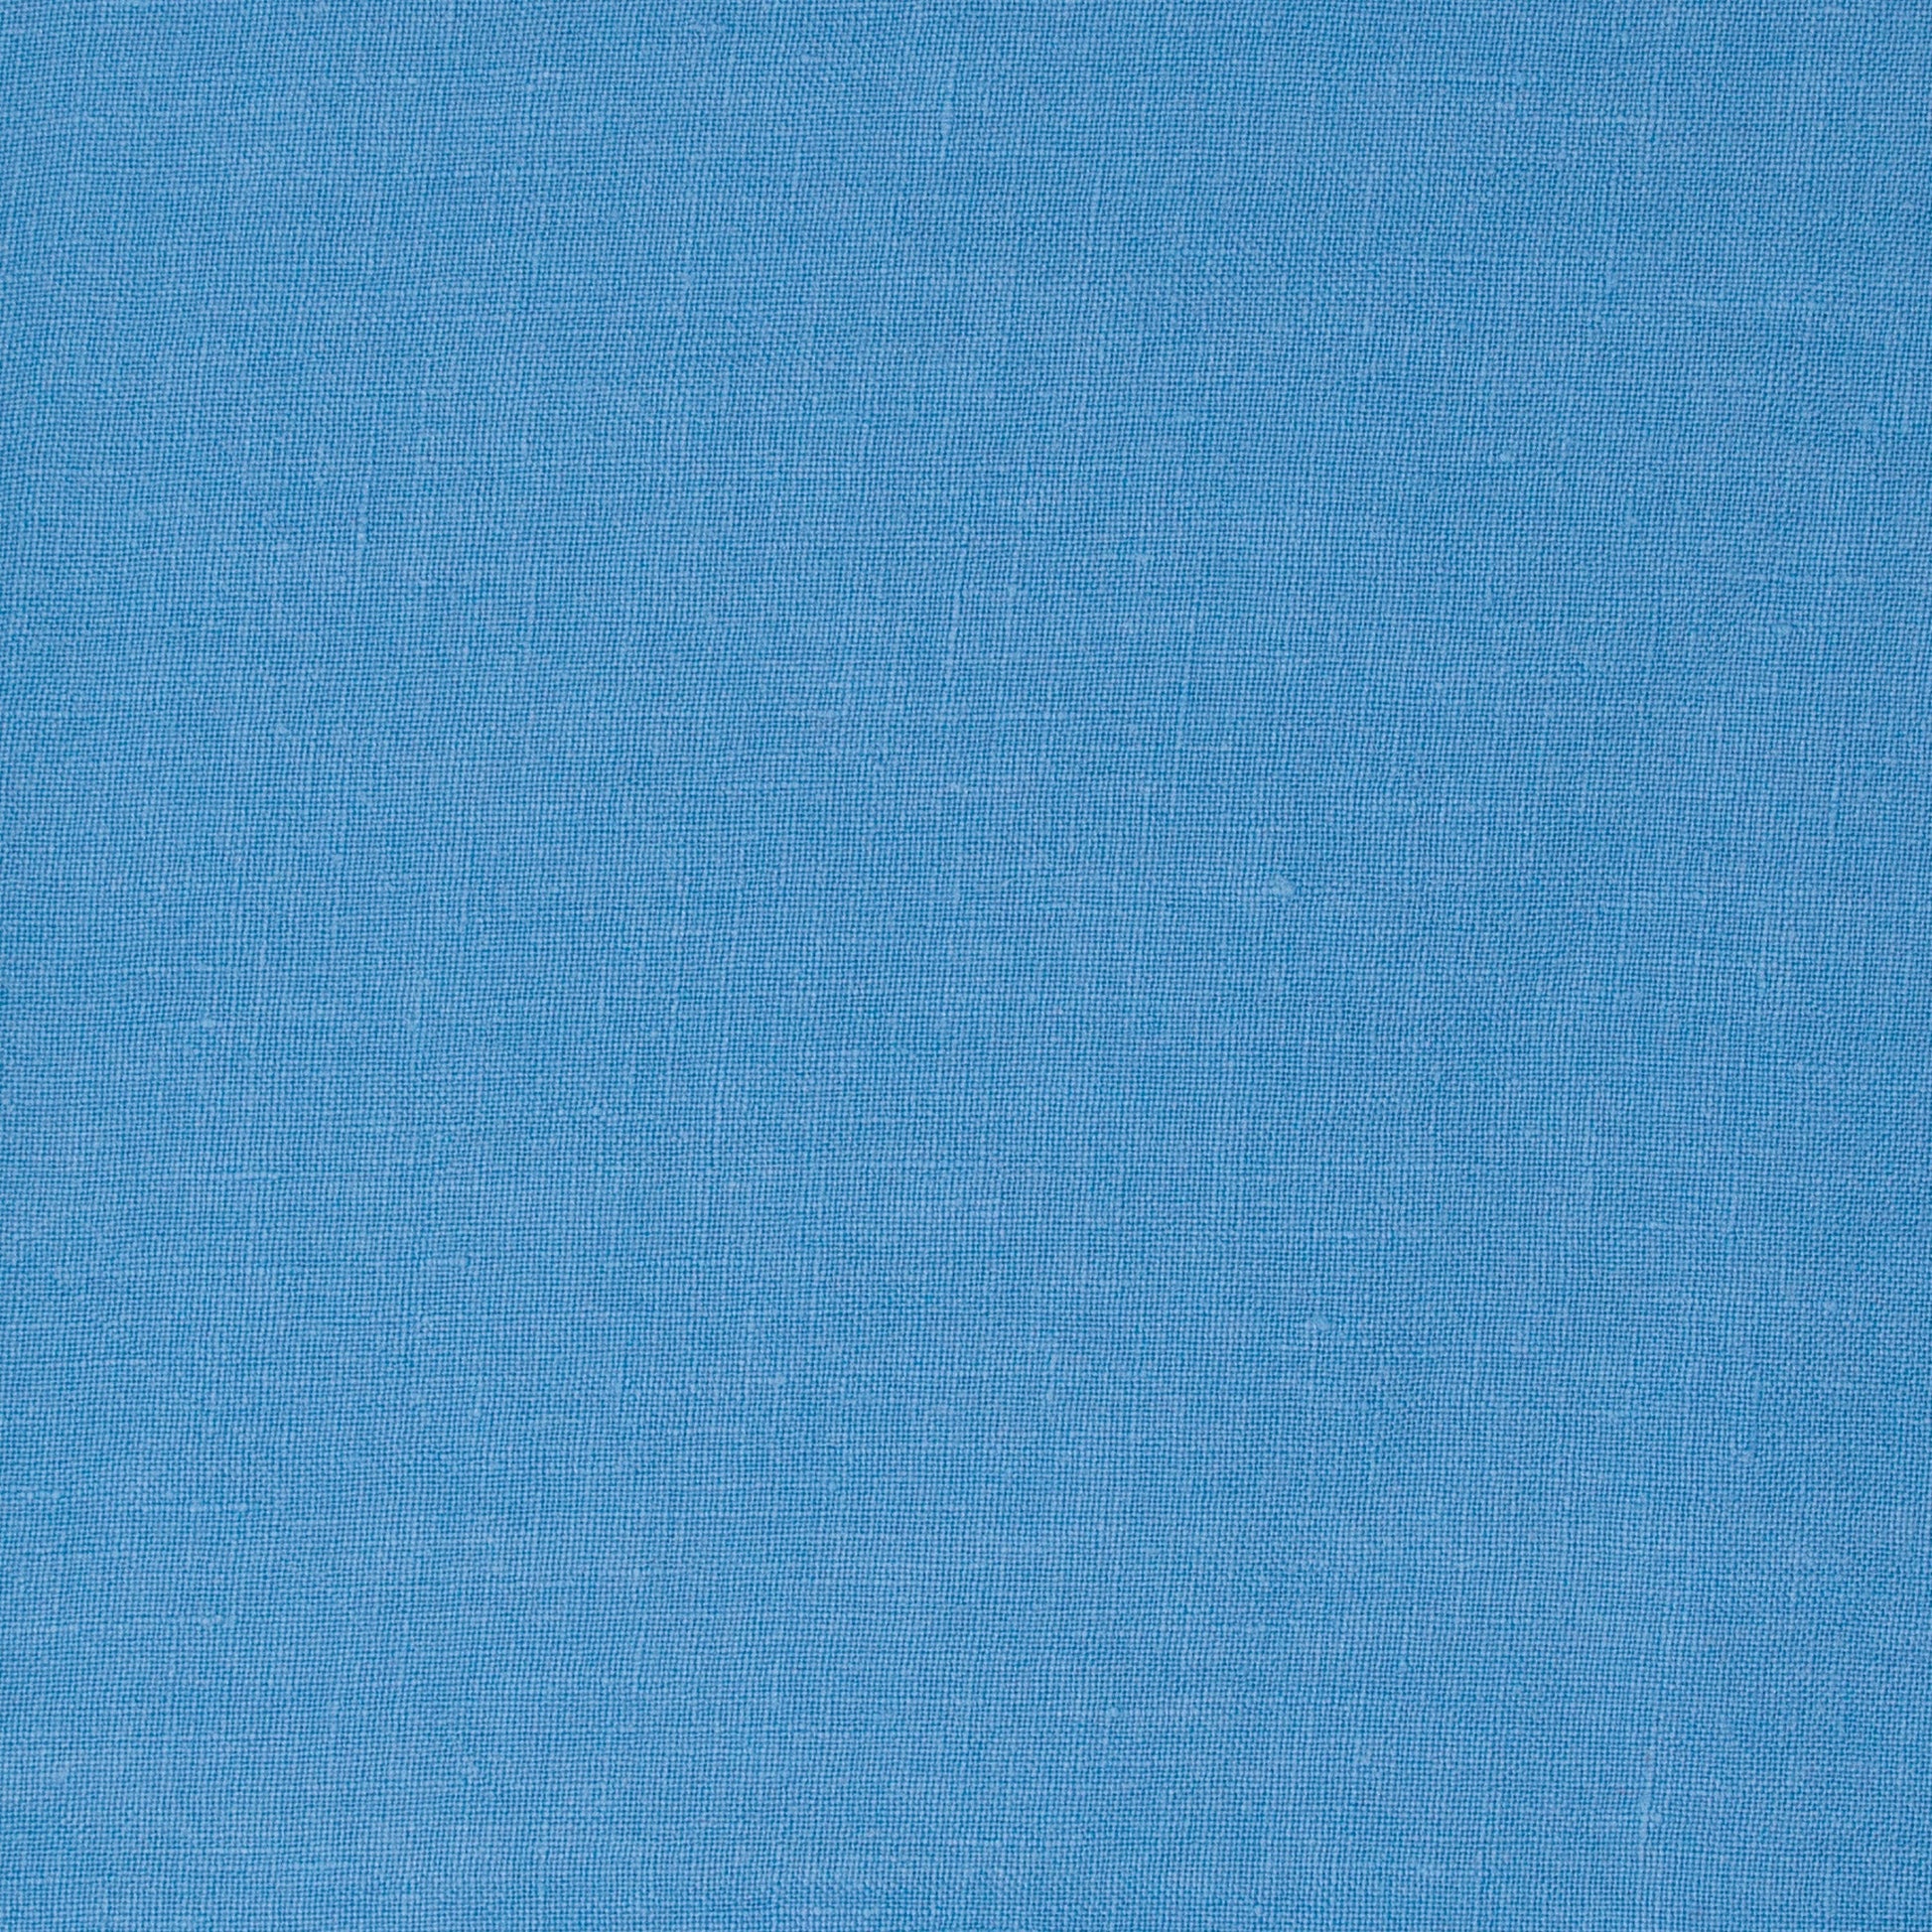 Poppy Washed Linen Bluebell ½ yd-Fabric-Spool of Thread